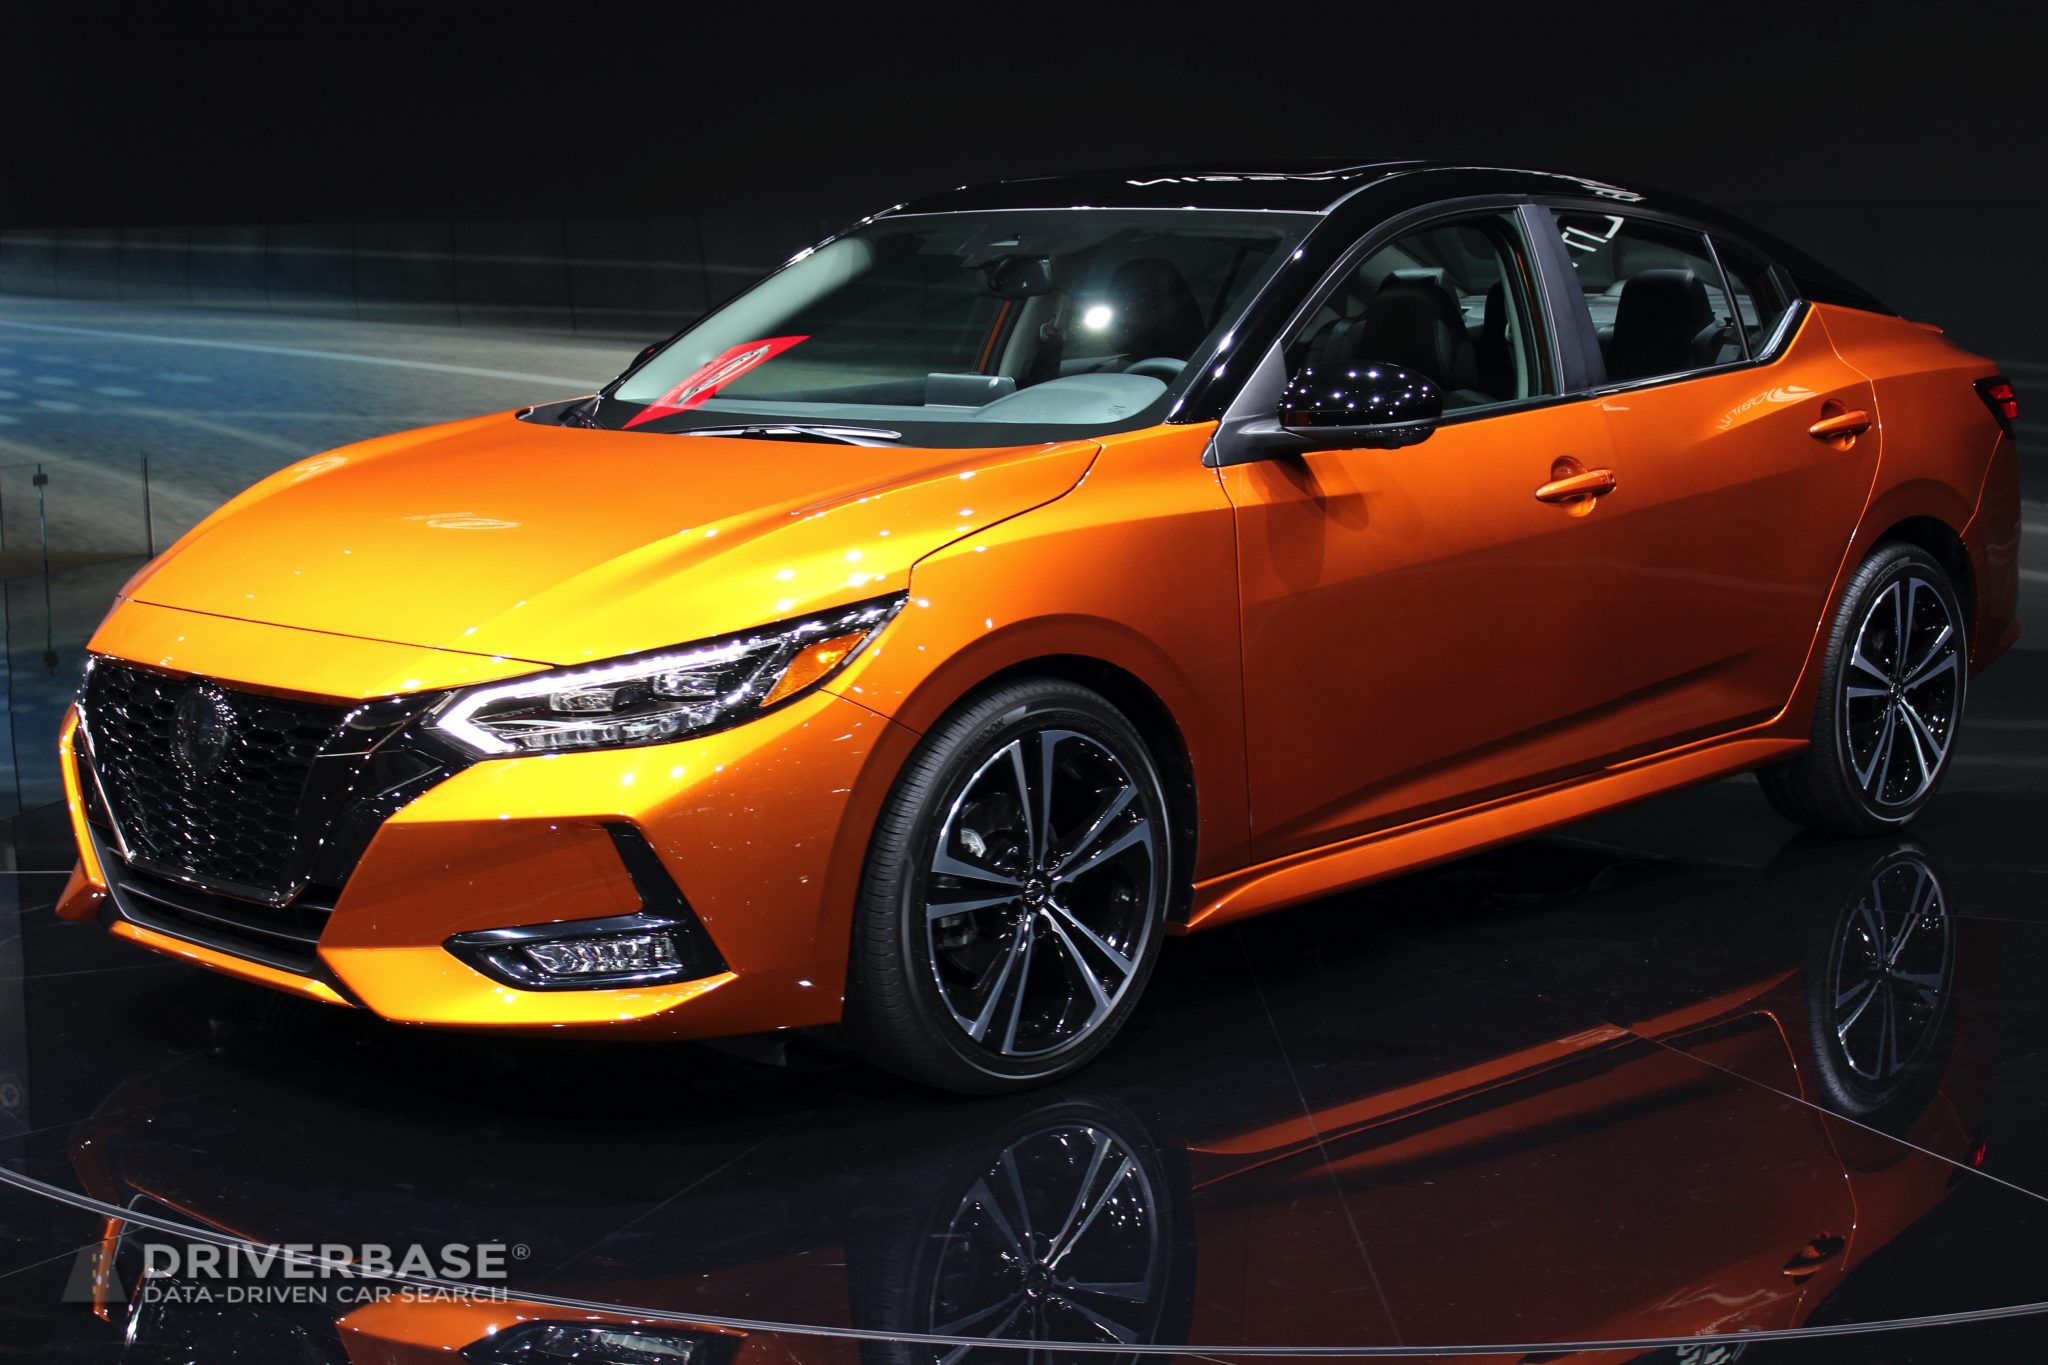 2020 Nissan Sentra at the 2019 Los Angeles Auto Show - Driverbase